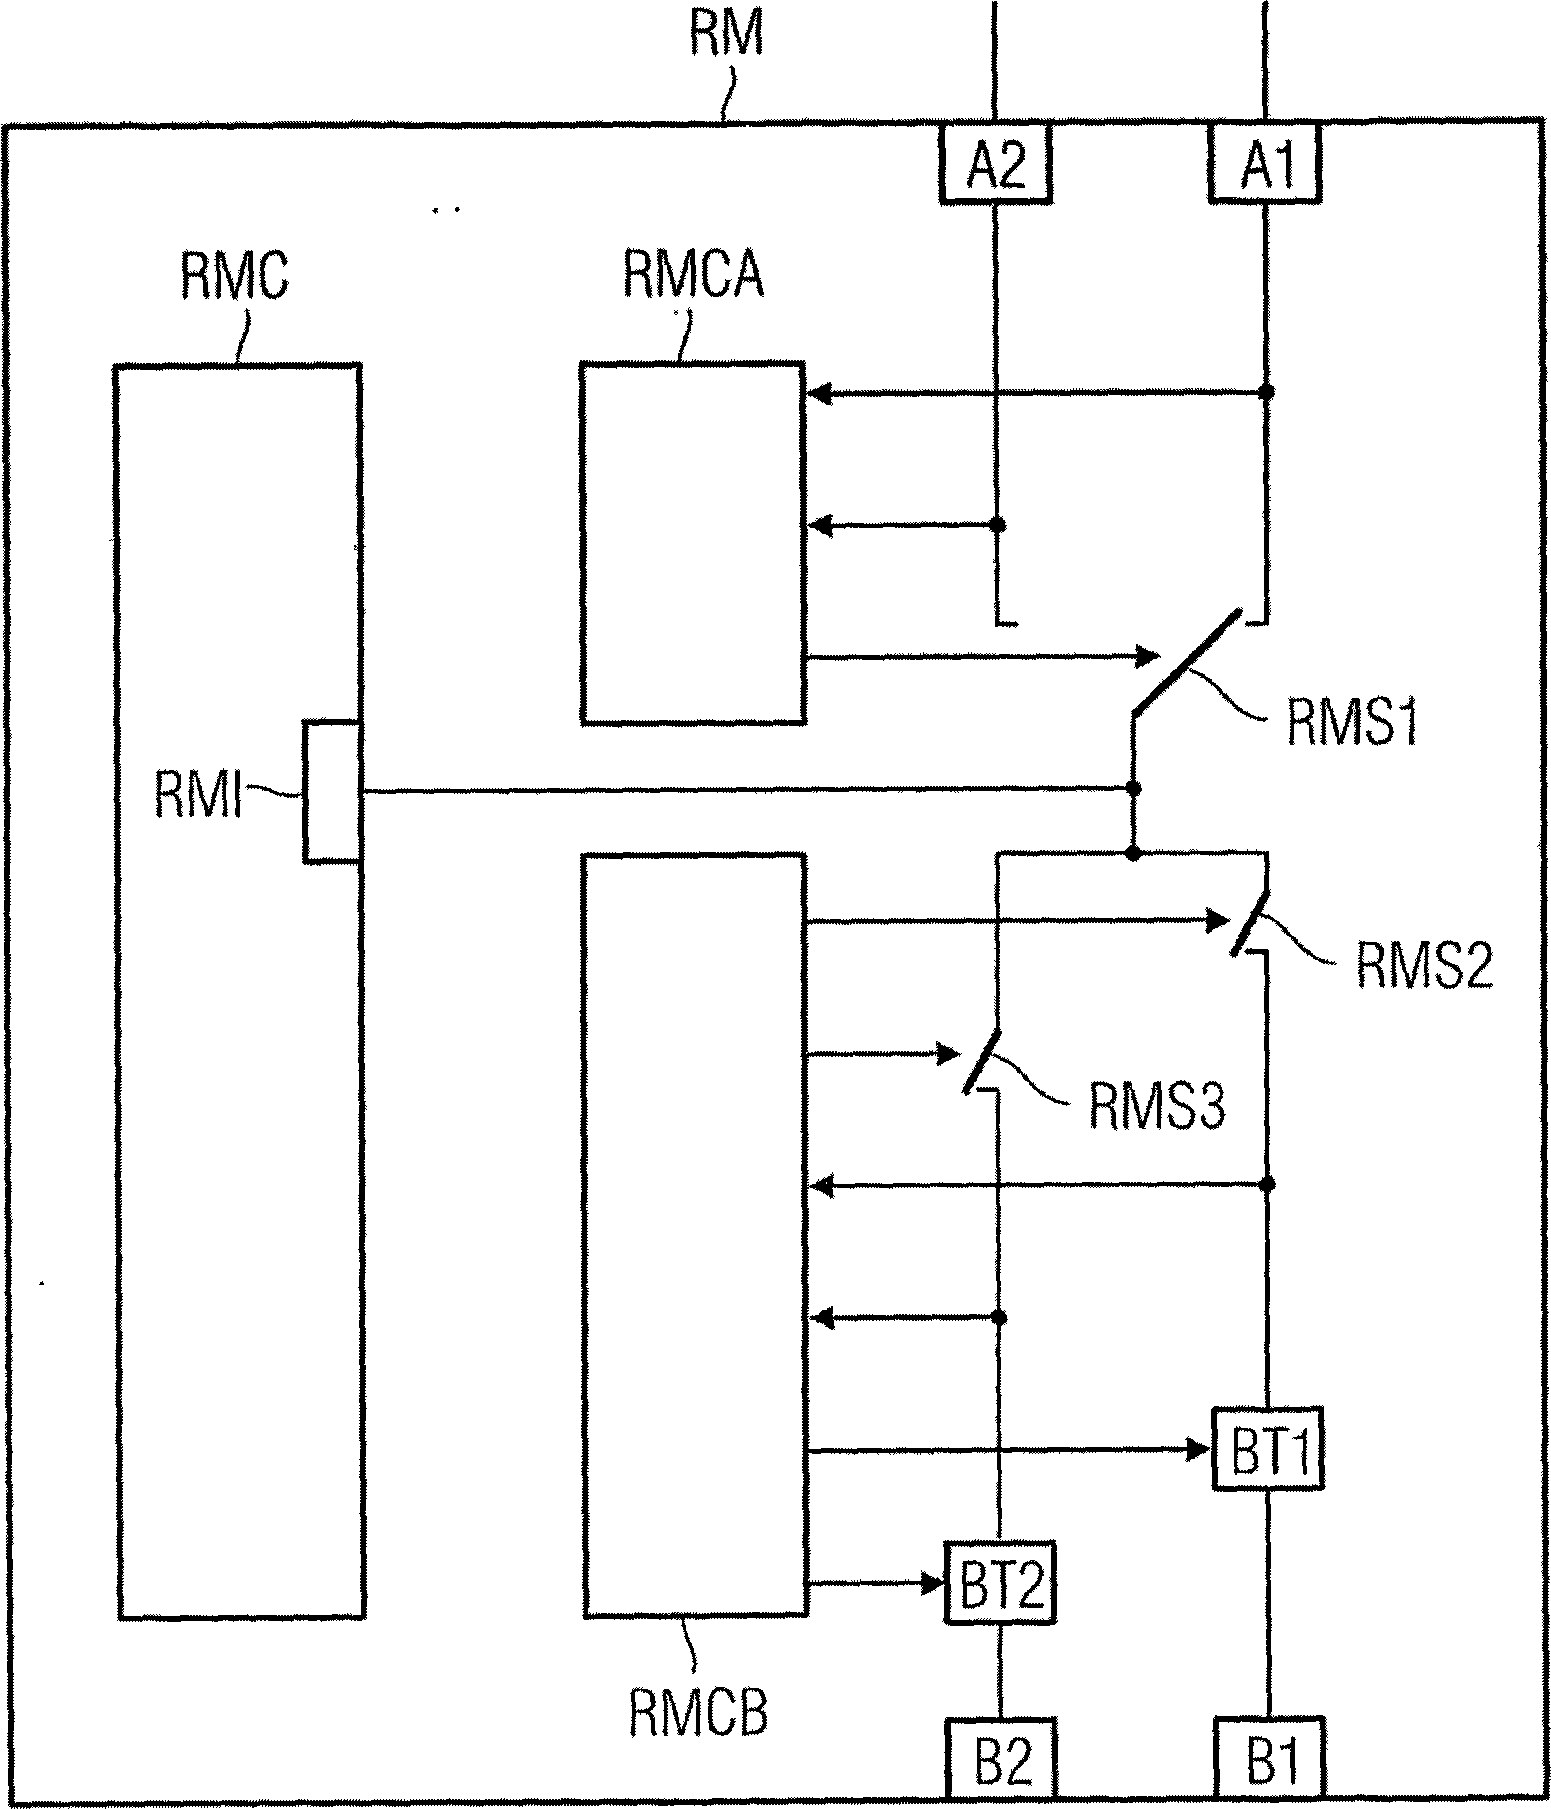 Method for operating a network